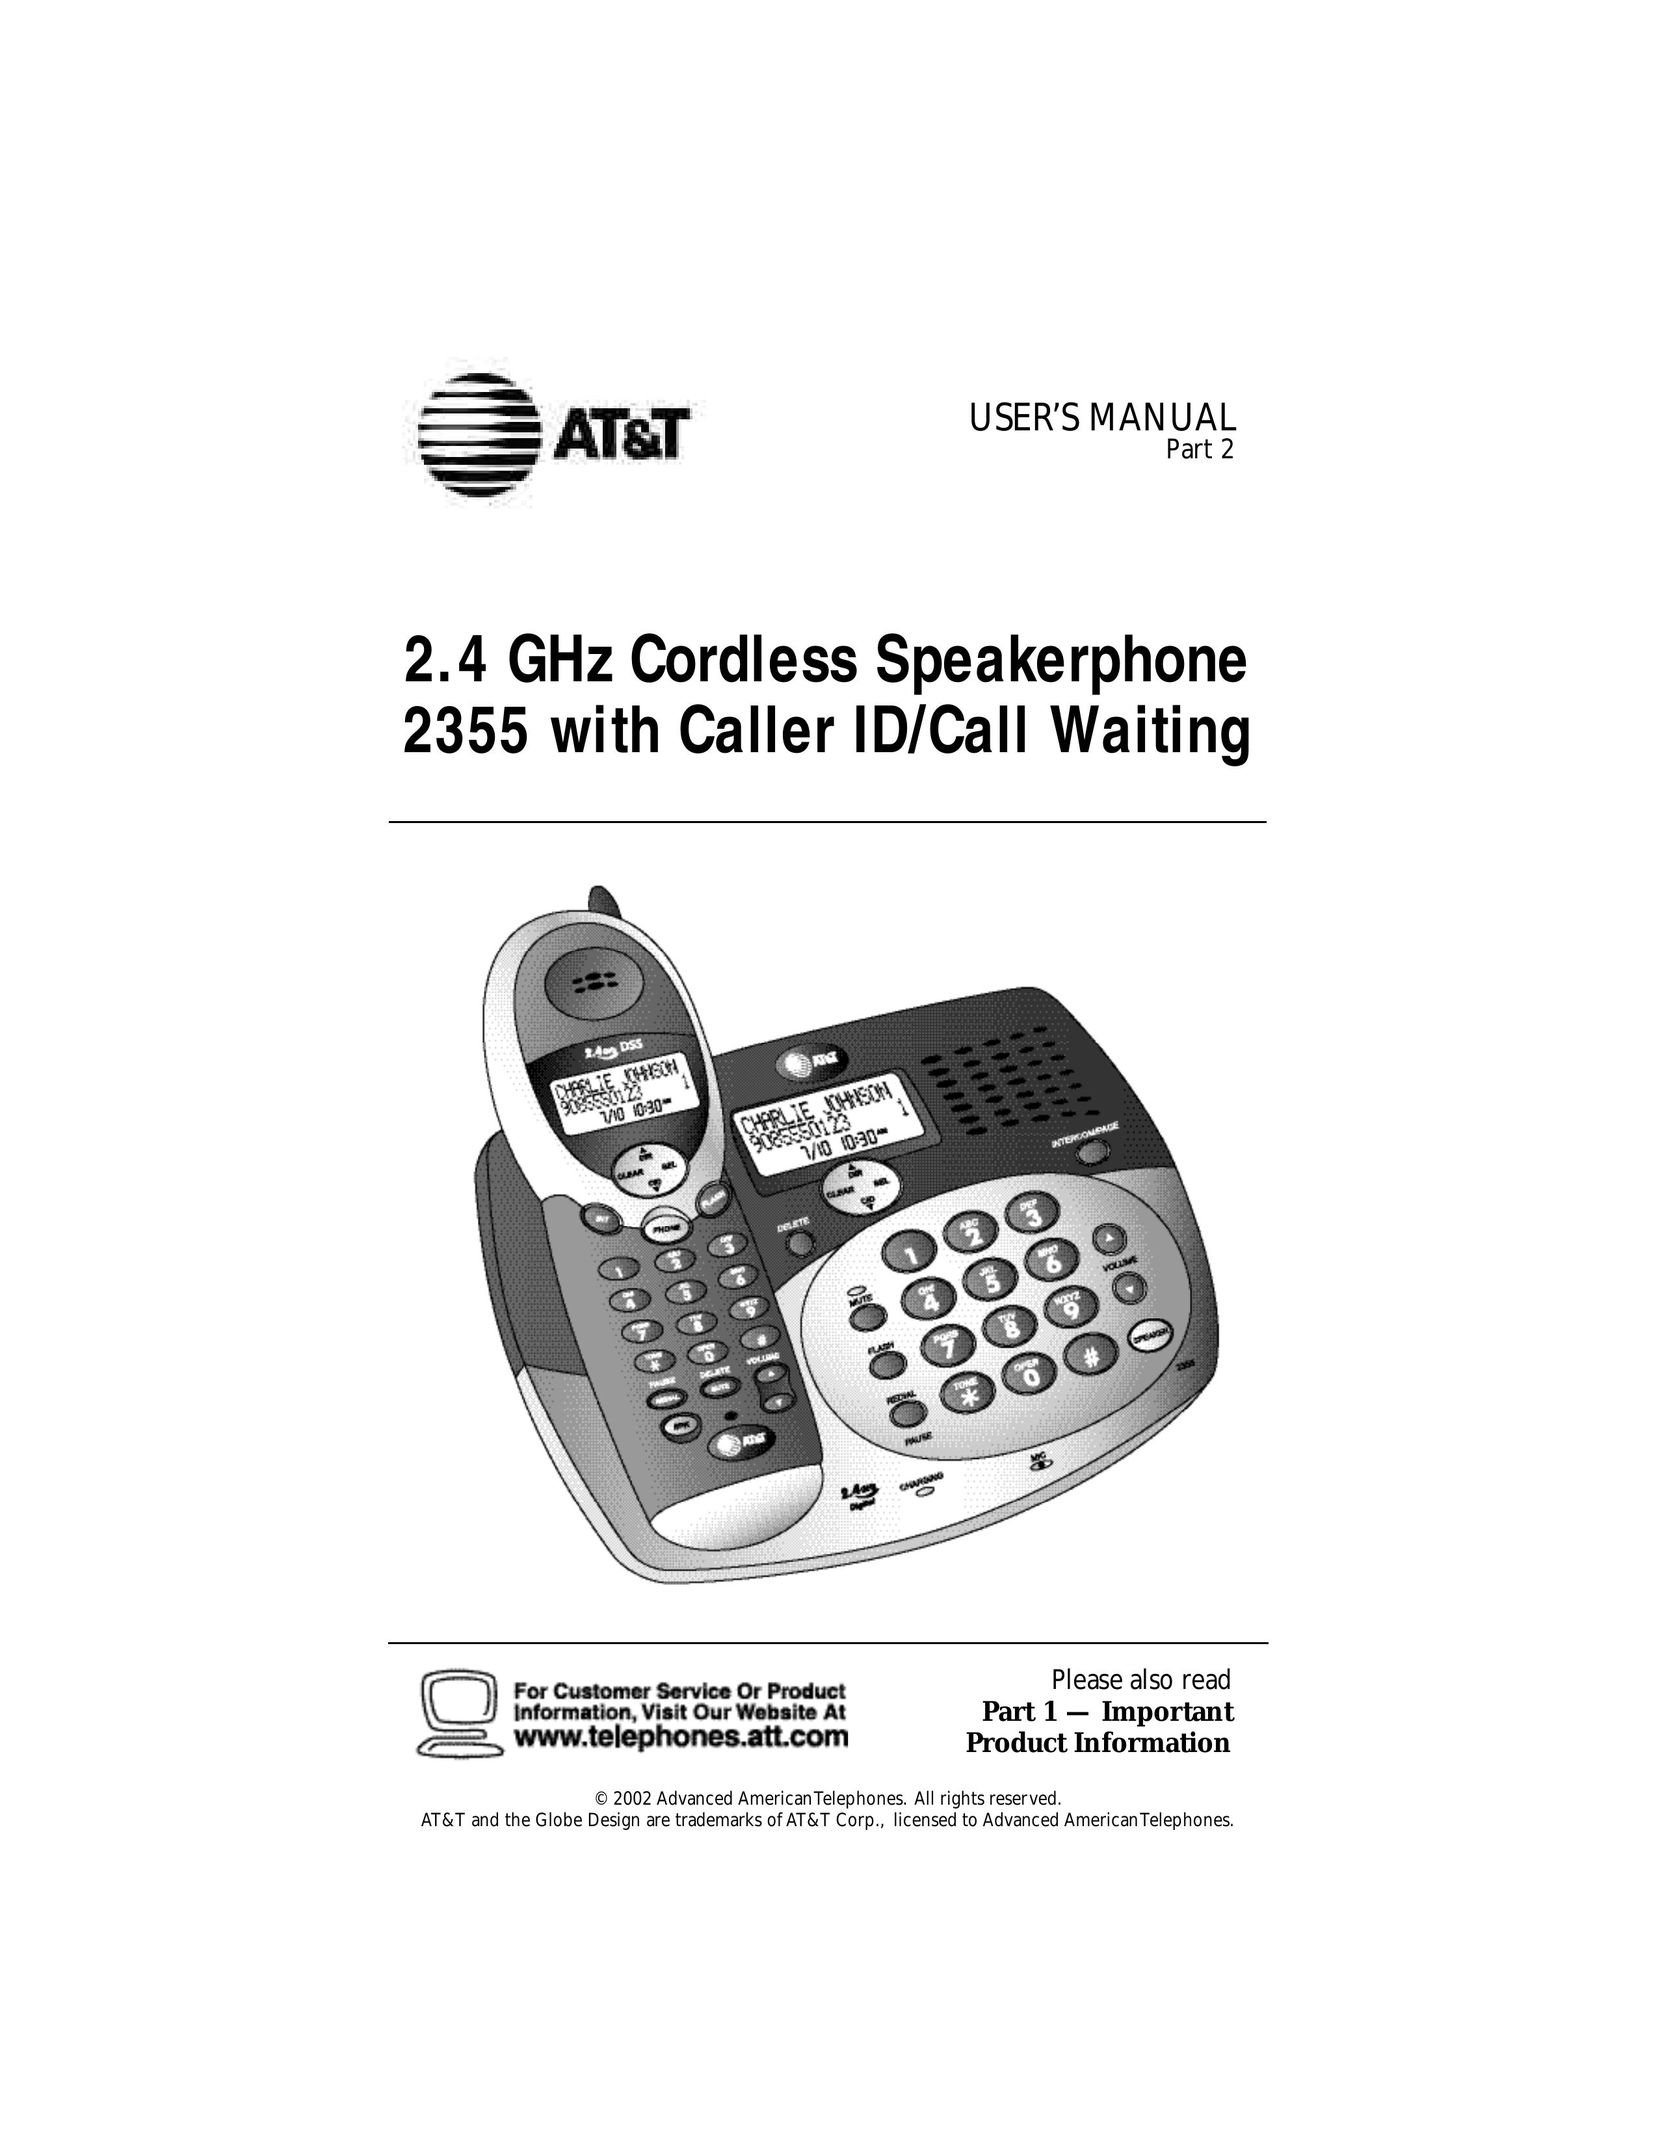 AT&T 2355 Conference Phone User Manual